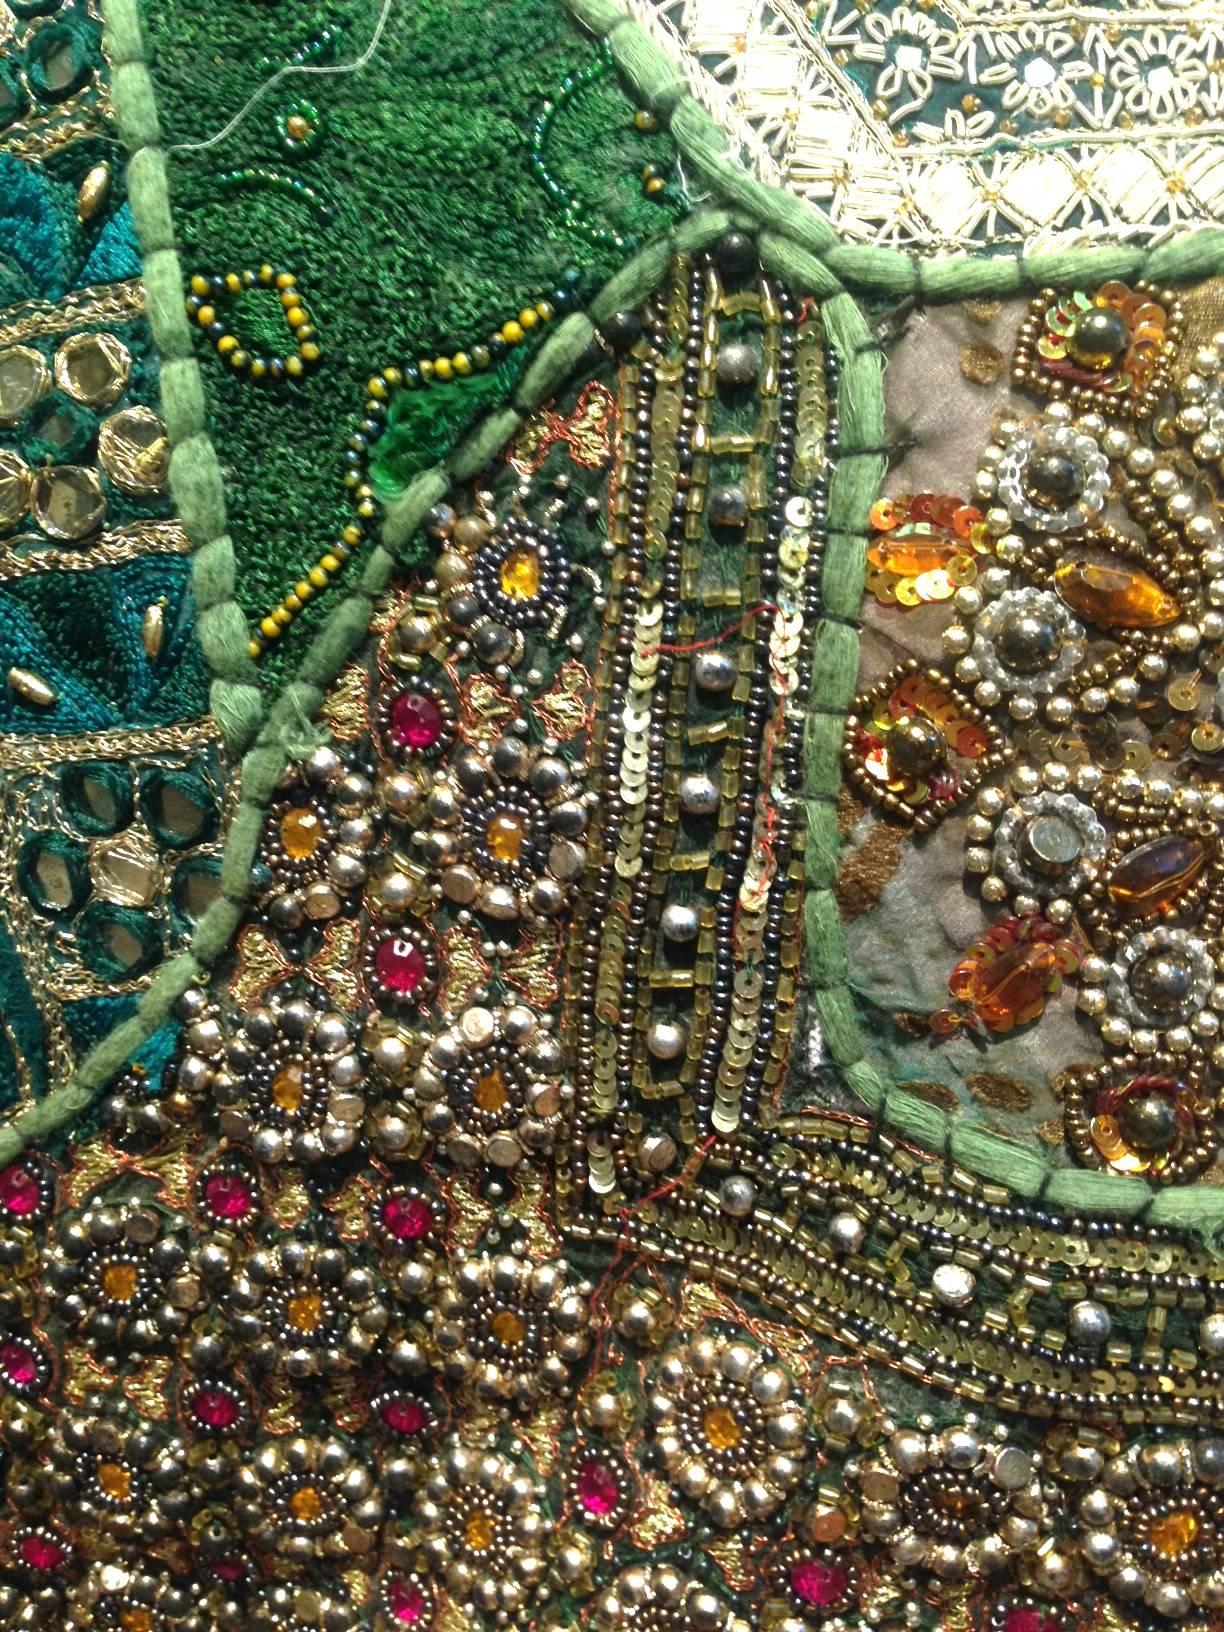 This hand-beaded tapestry, made in India is equally as intricate as it is stunning. The entire tapestry is covered with precious and semi precious beads, sequins and stones.